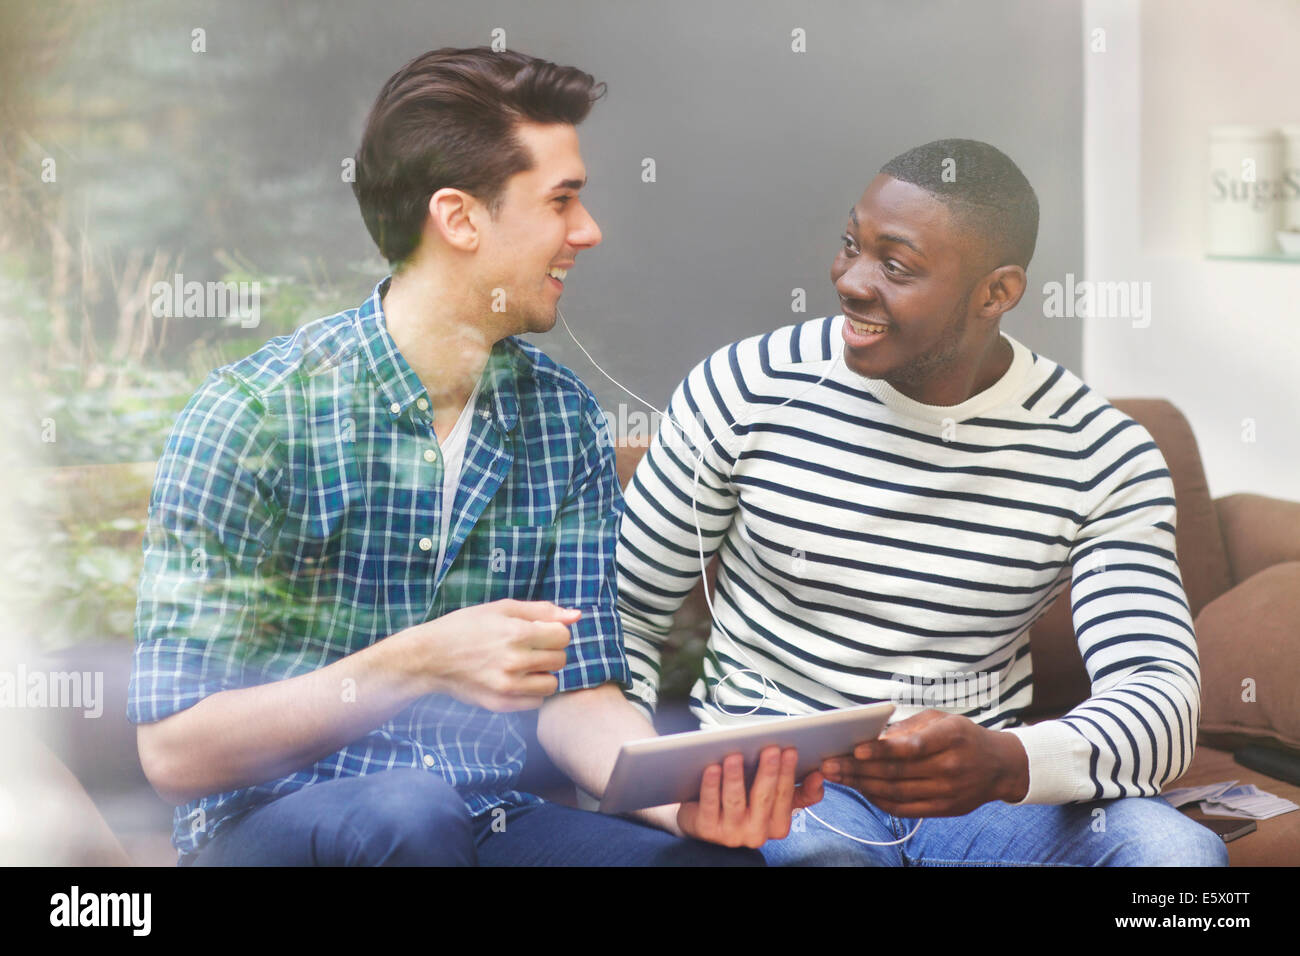 Two young male friends listening to music on digital tablet behind window Stock Photo